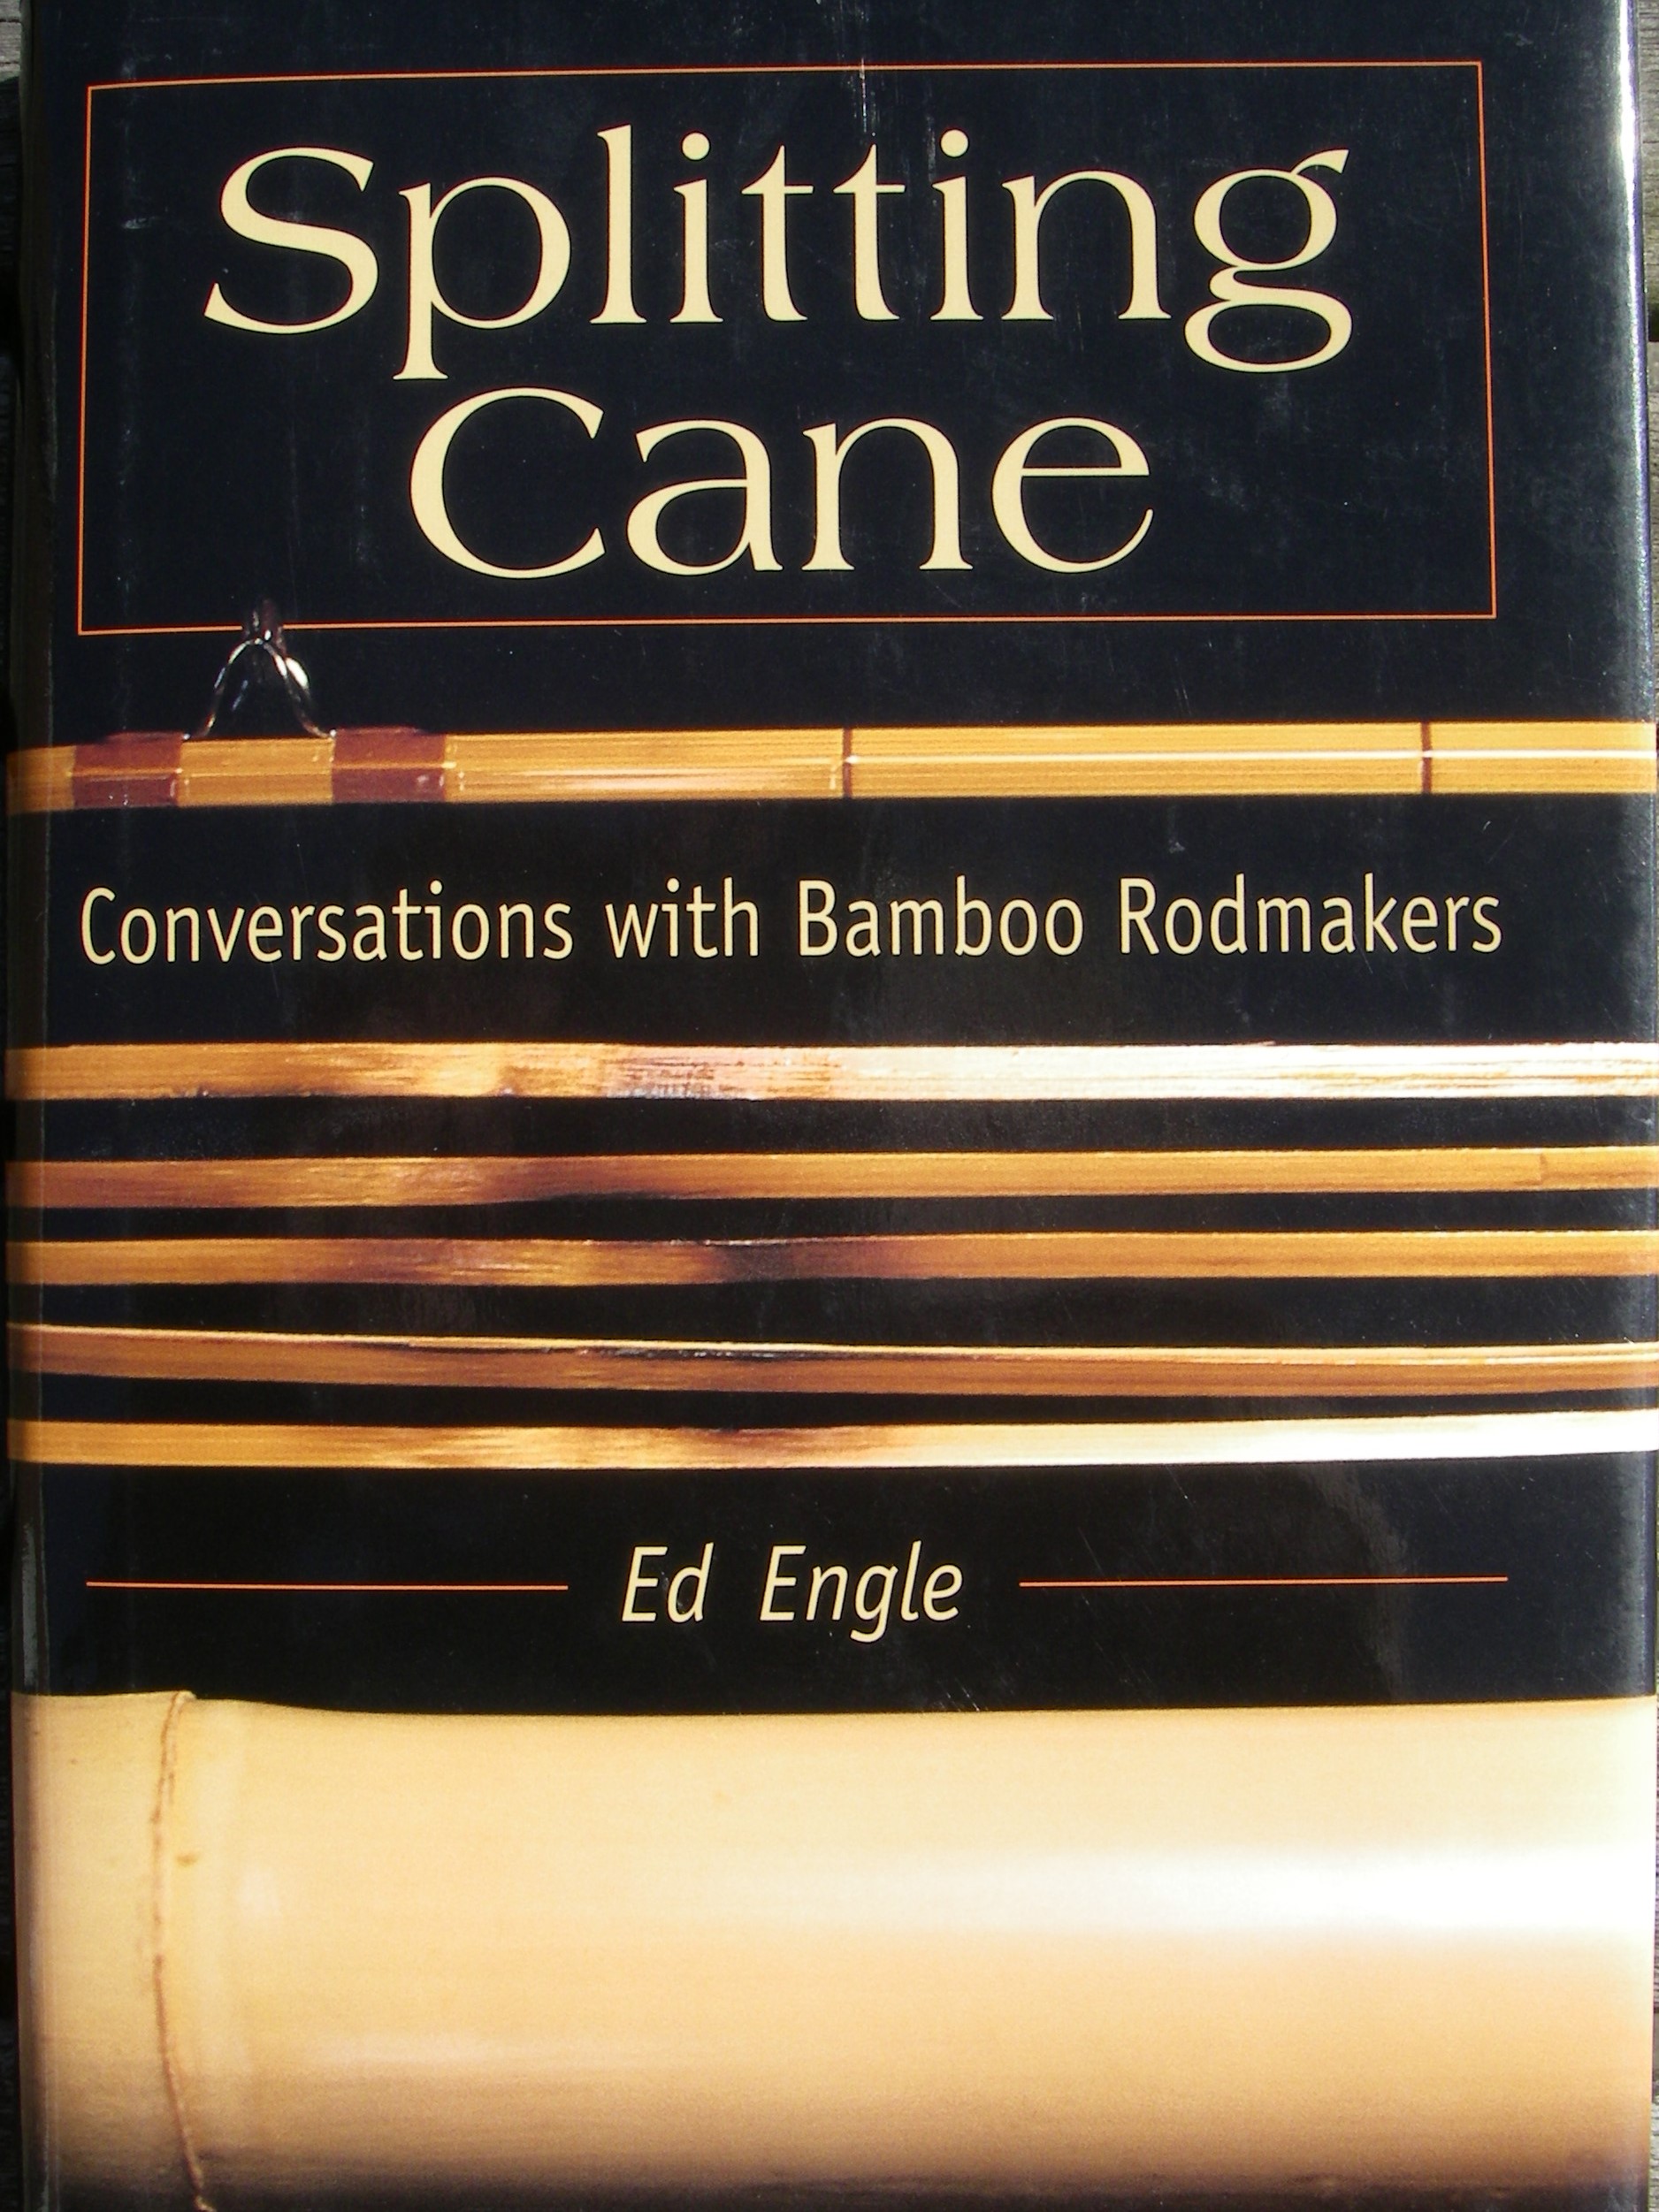 NEW BAMBOO RODMAKING BOOK The Manchester Method of Constructing Split Cane Rods 